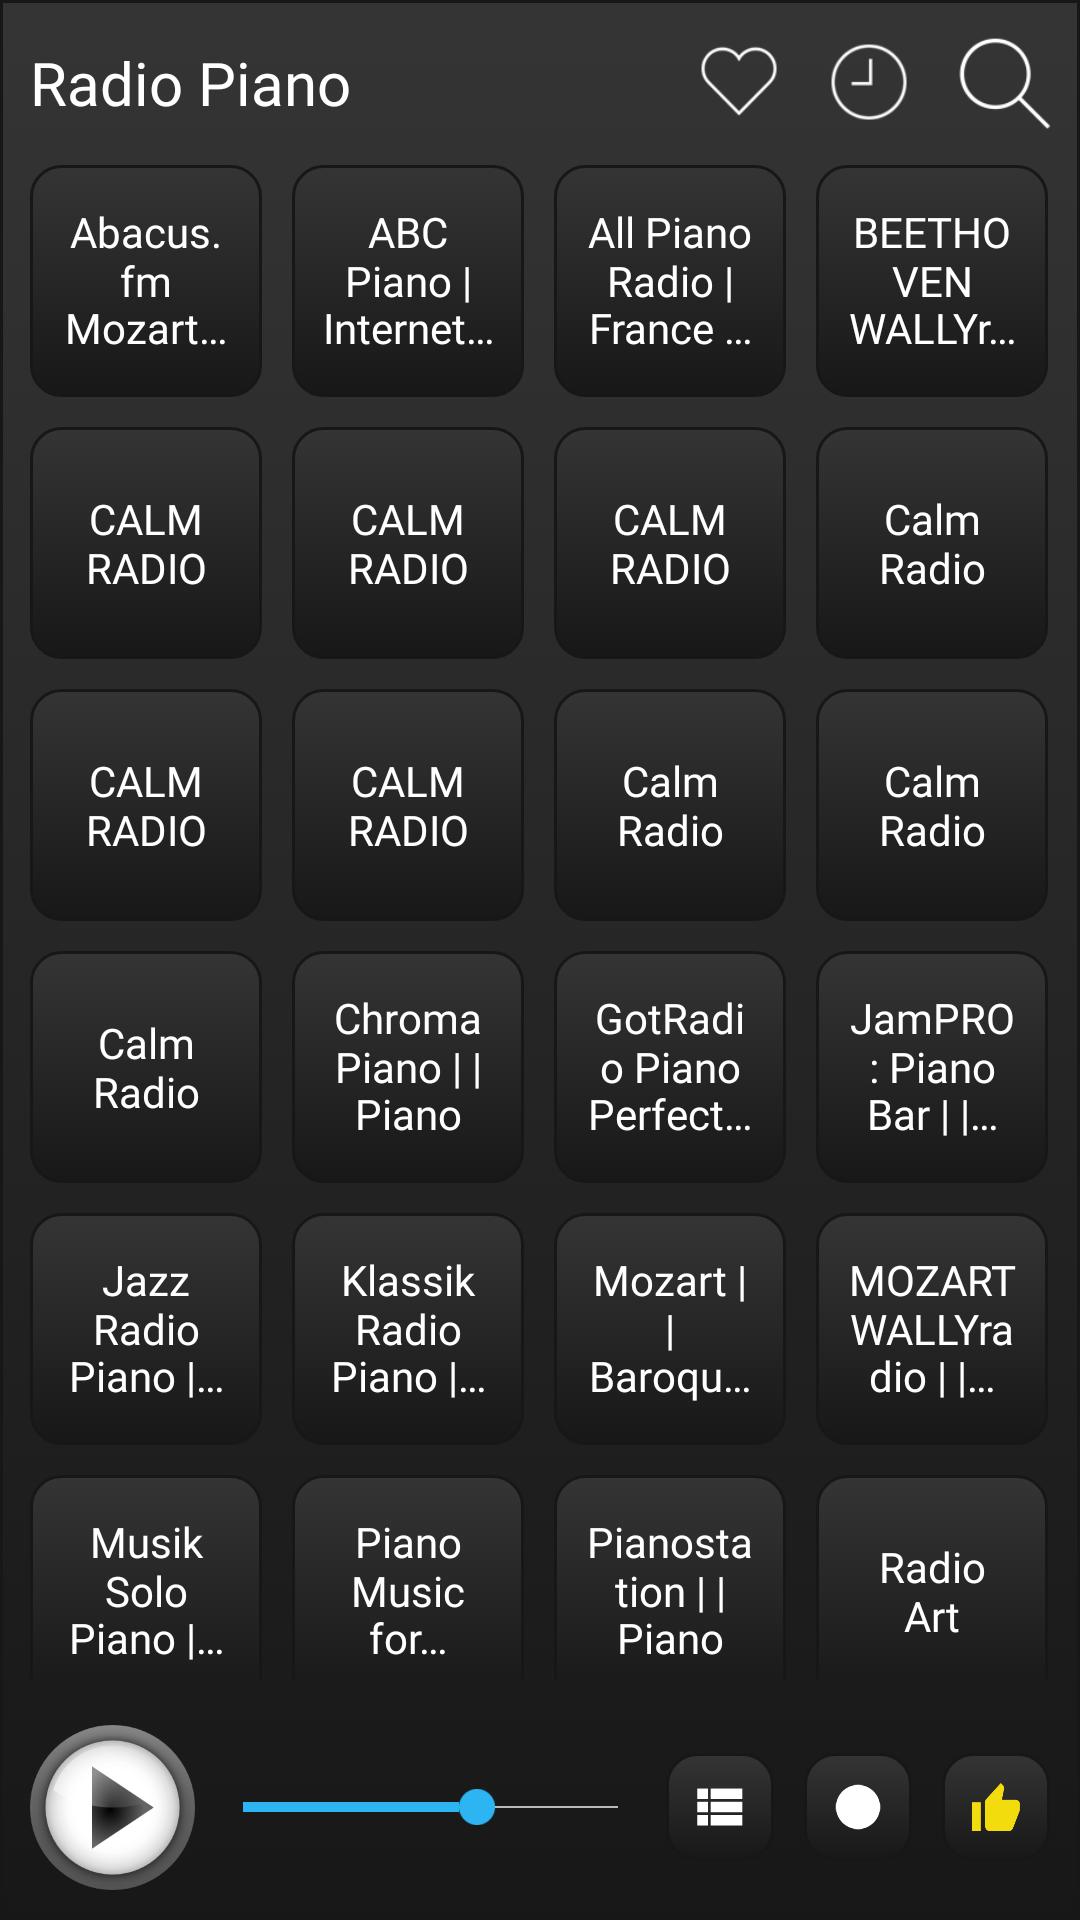 Piano Radio Station Online - Piano FM AM Music for Android - APK Download